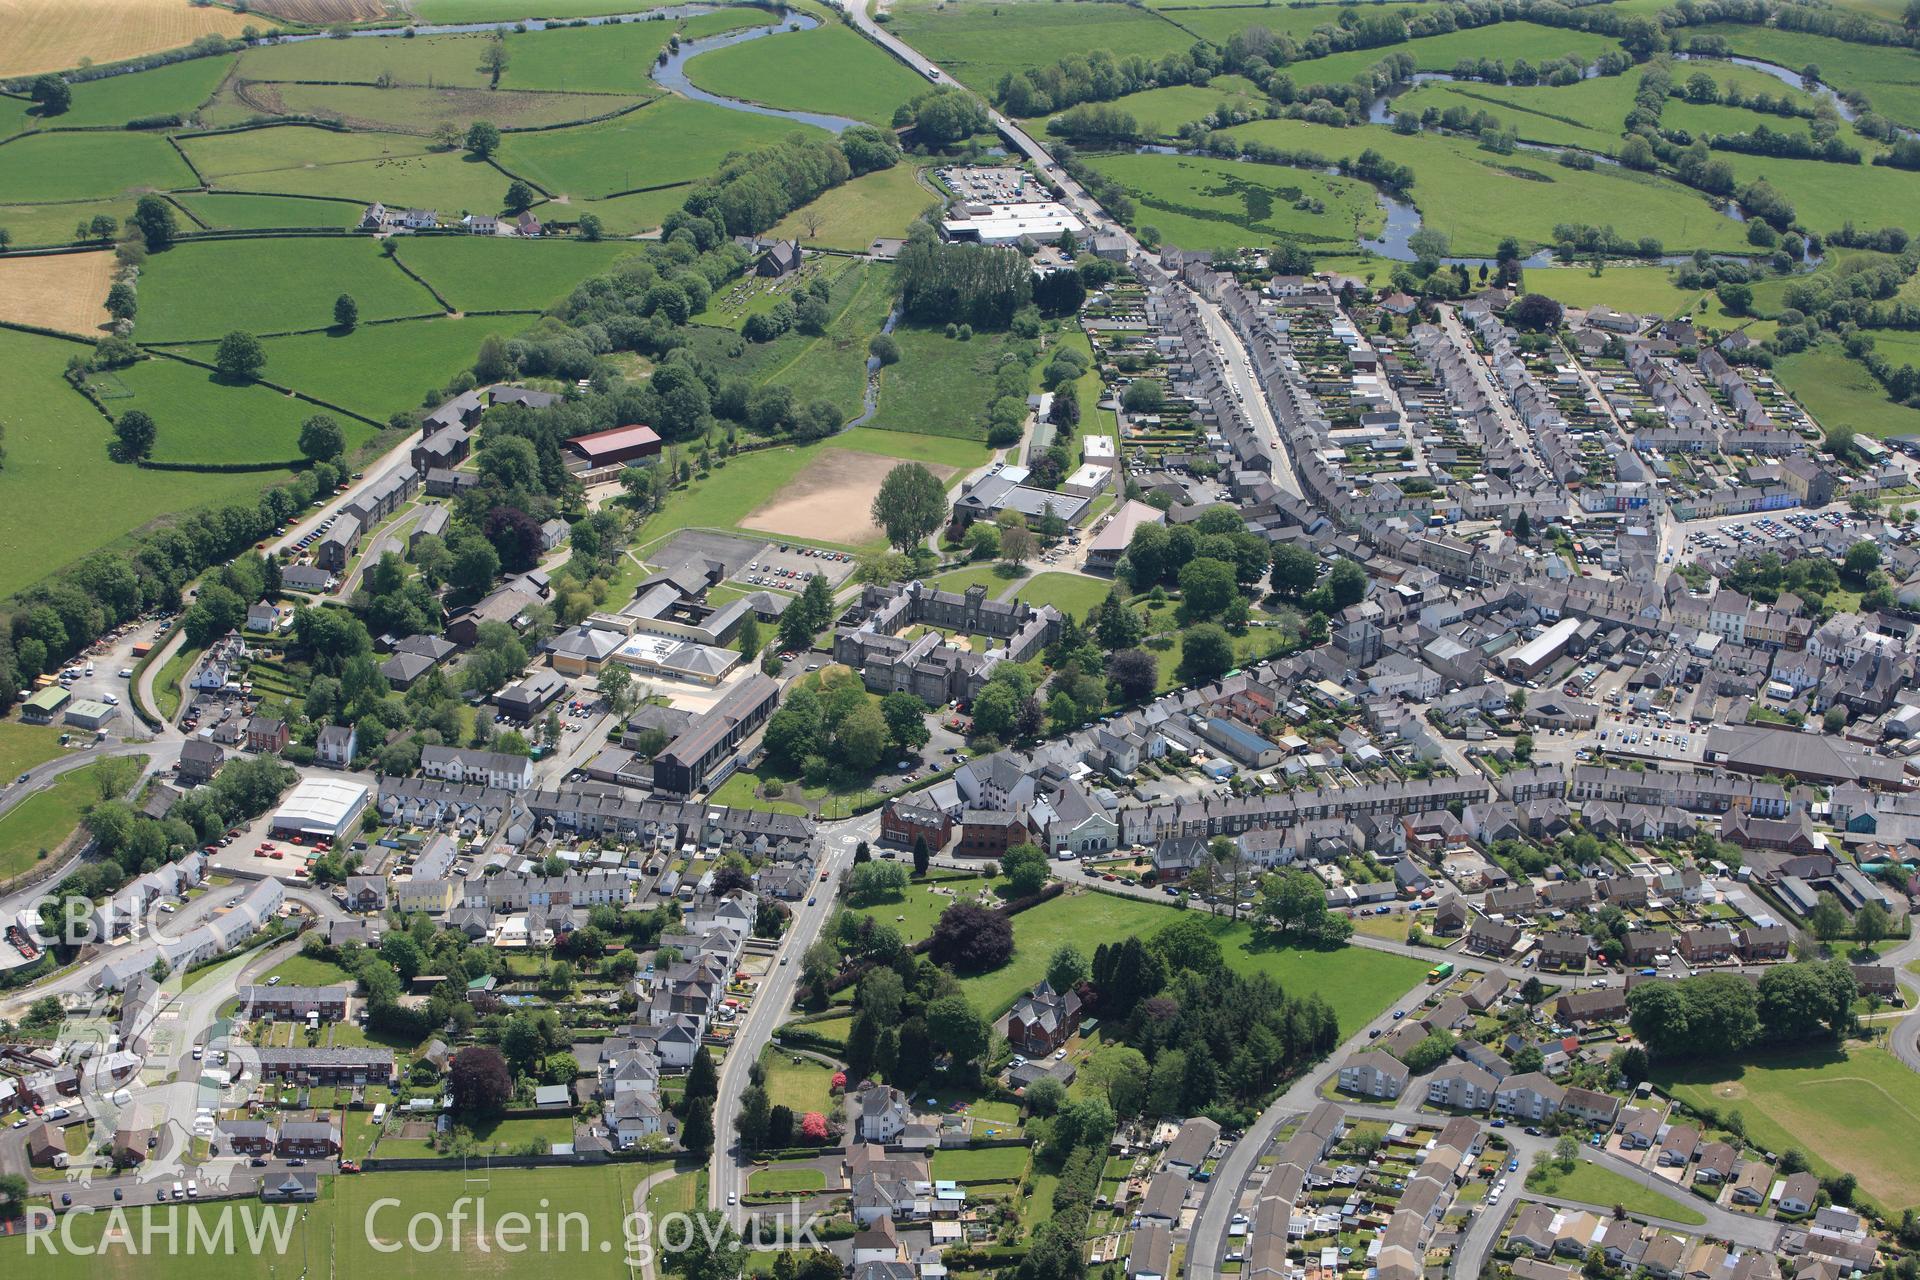 RCAHMW colour oblique photograph of Long view of Lampeter. Taken by Toby Driver on 28/05/2012.